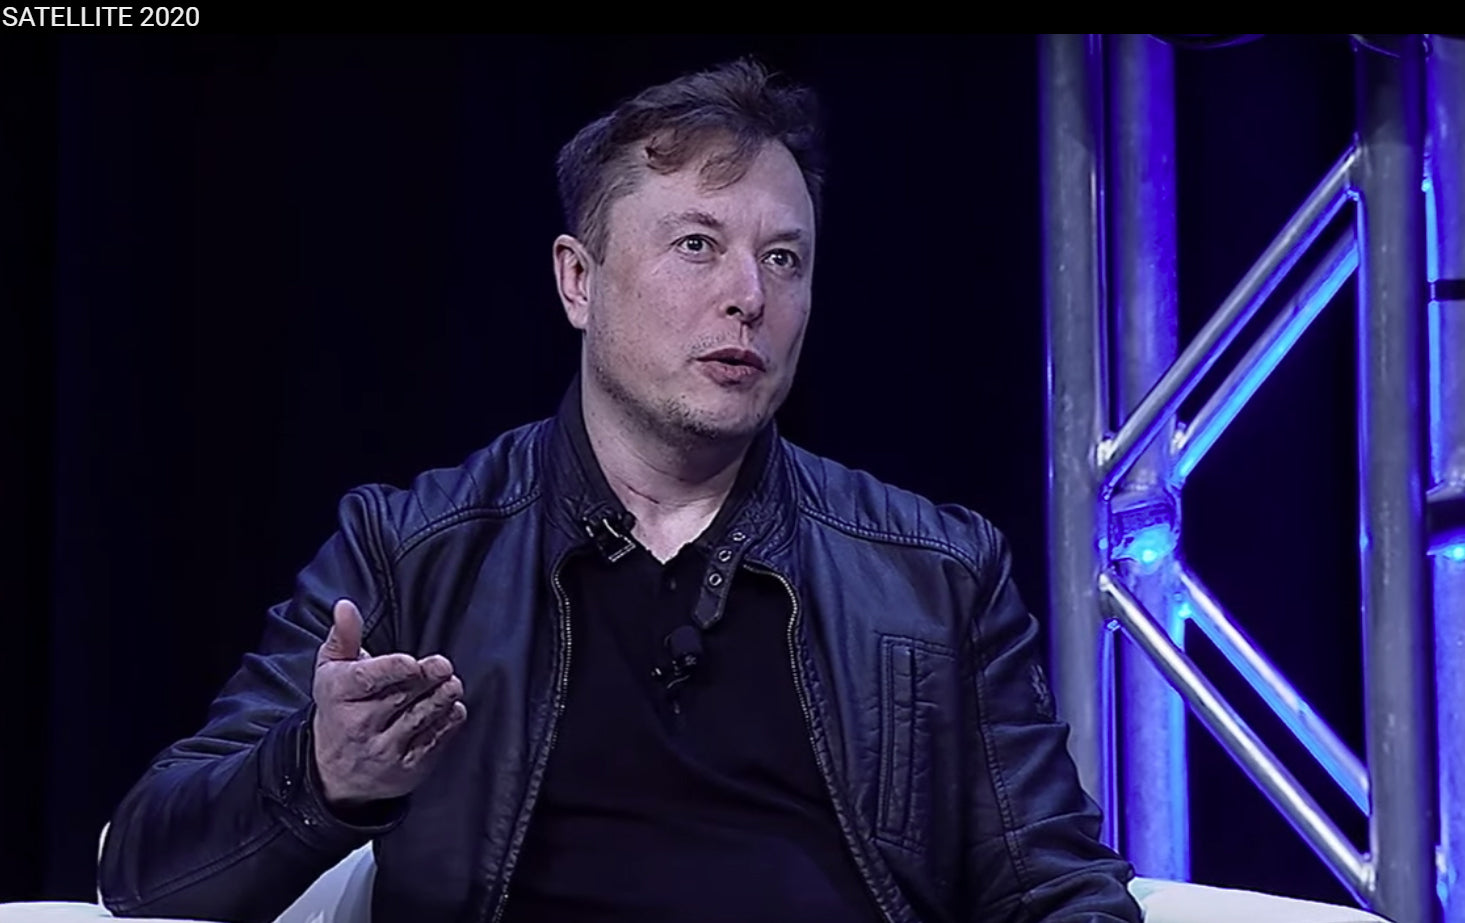 Elon Musk attends the Satellite 2020 conference, says 'you don't need college to learn stuff'  [Video]